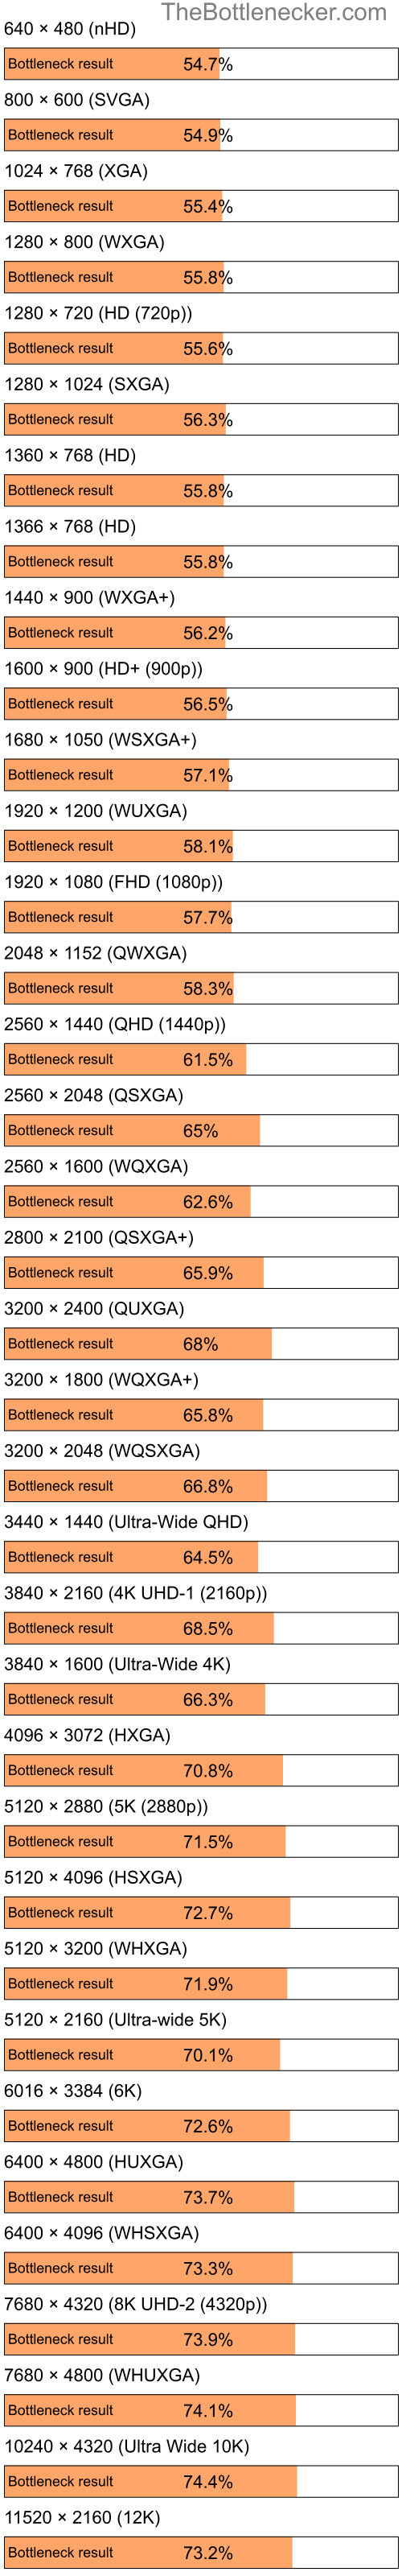 Bottleneck results by resolution for Intel Pentium 4 and NVIDIA GeForce 9200M GS in General Tasks